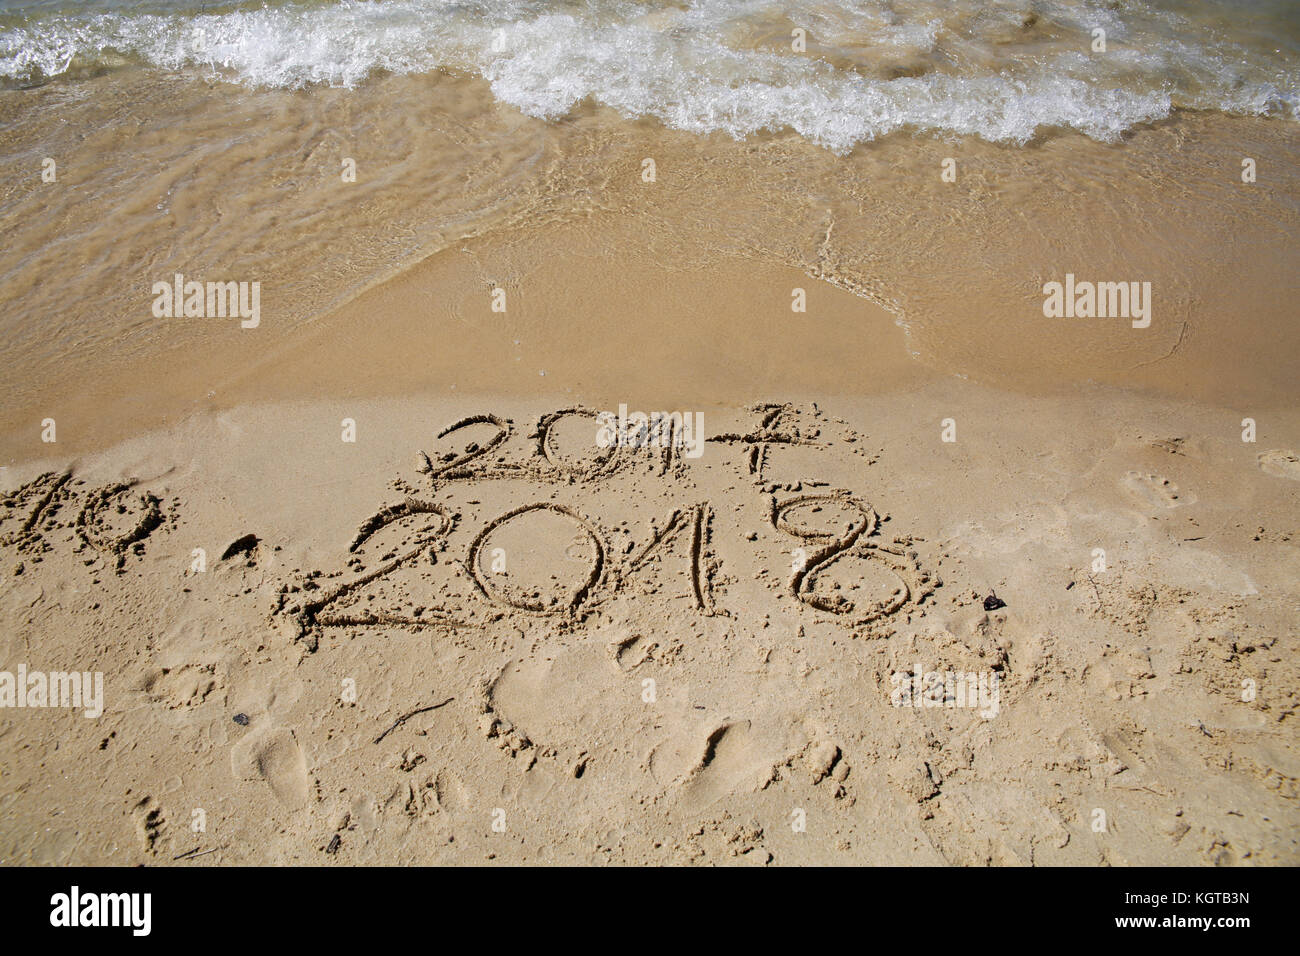 Sandy beach with current year written Stock Photo